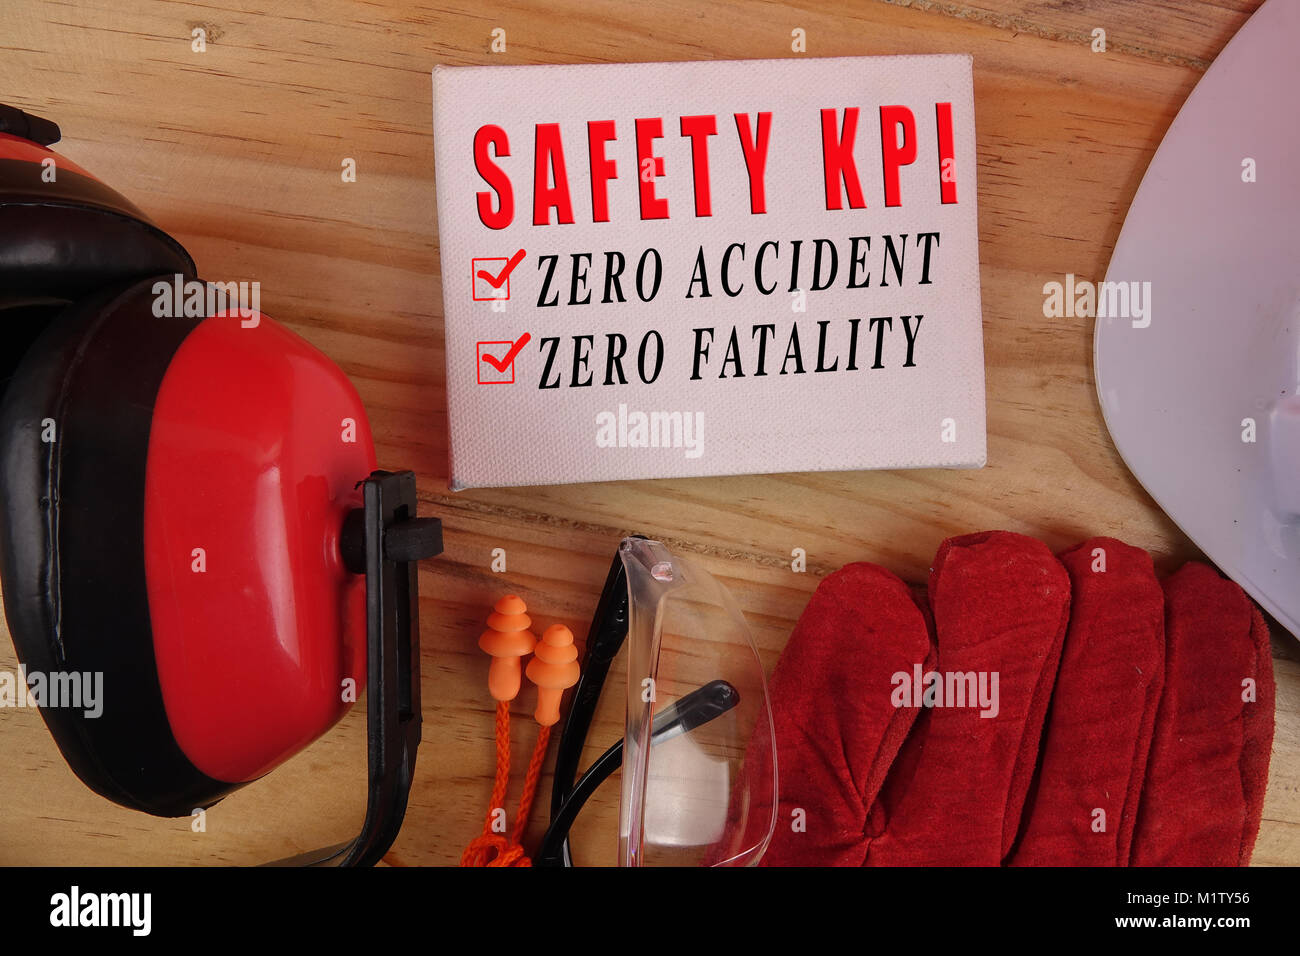 SAFETY AND HEALTH CONCEPT Stock Photo